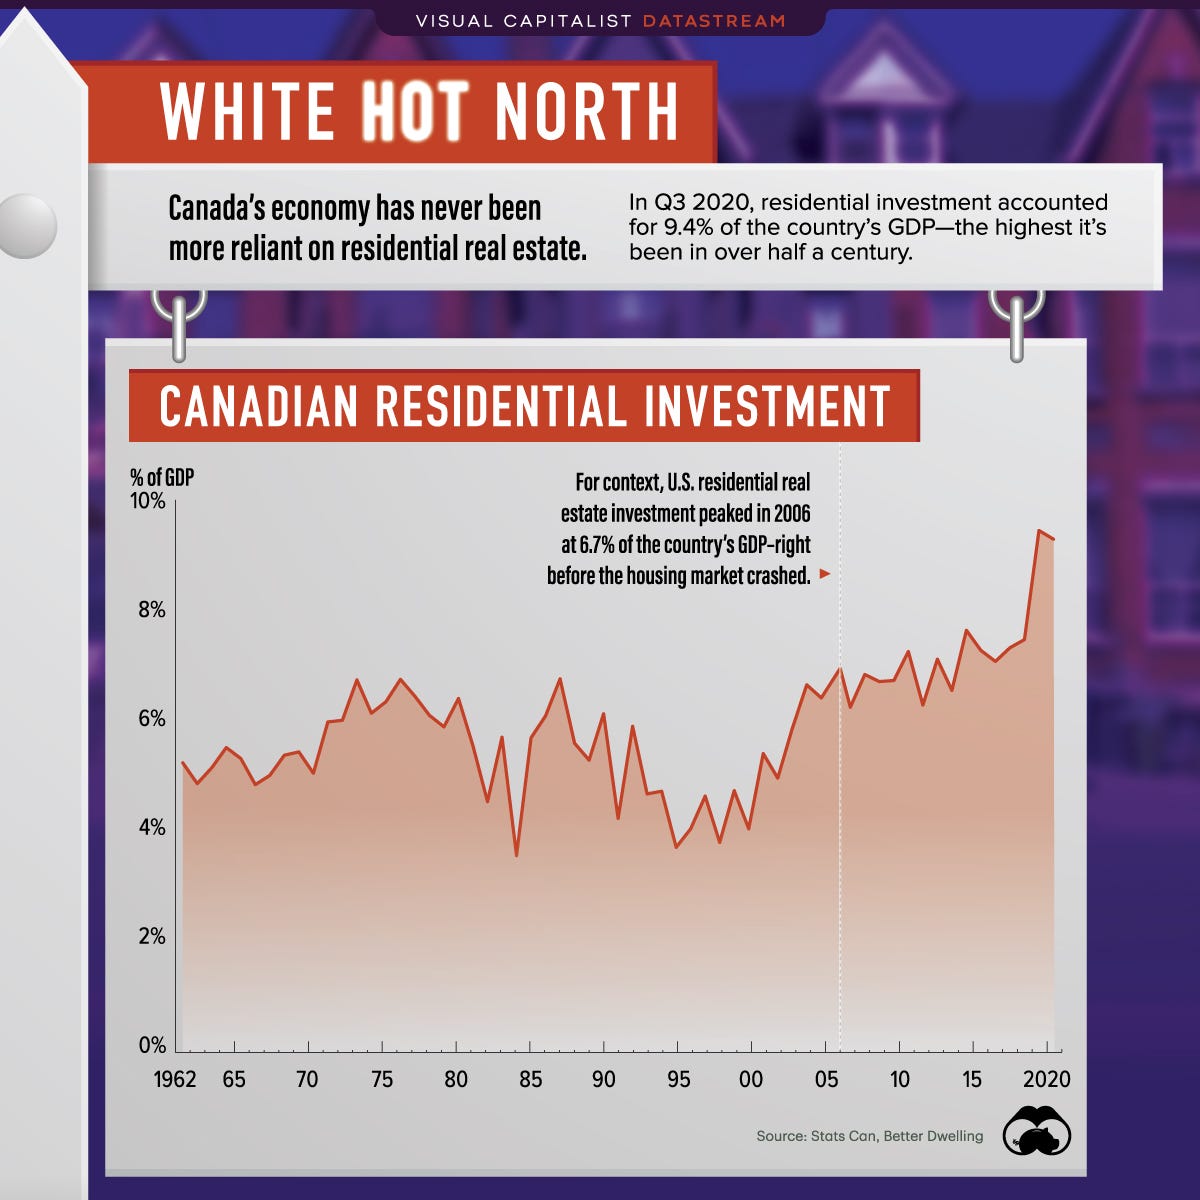 White Hot North: Residential Real Estate Investment in Canada